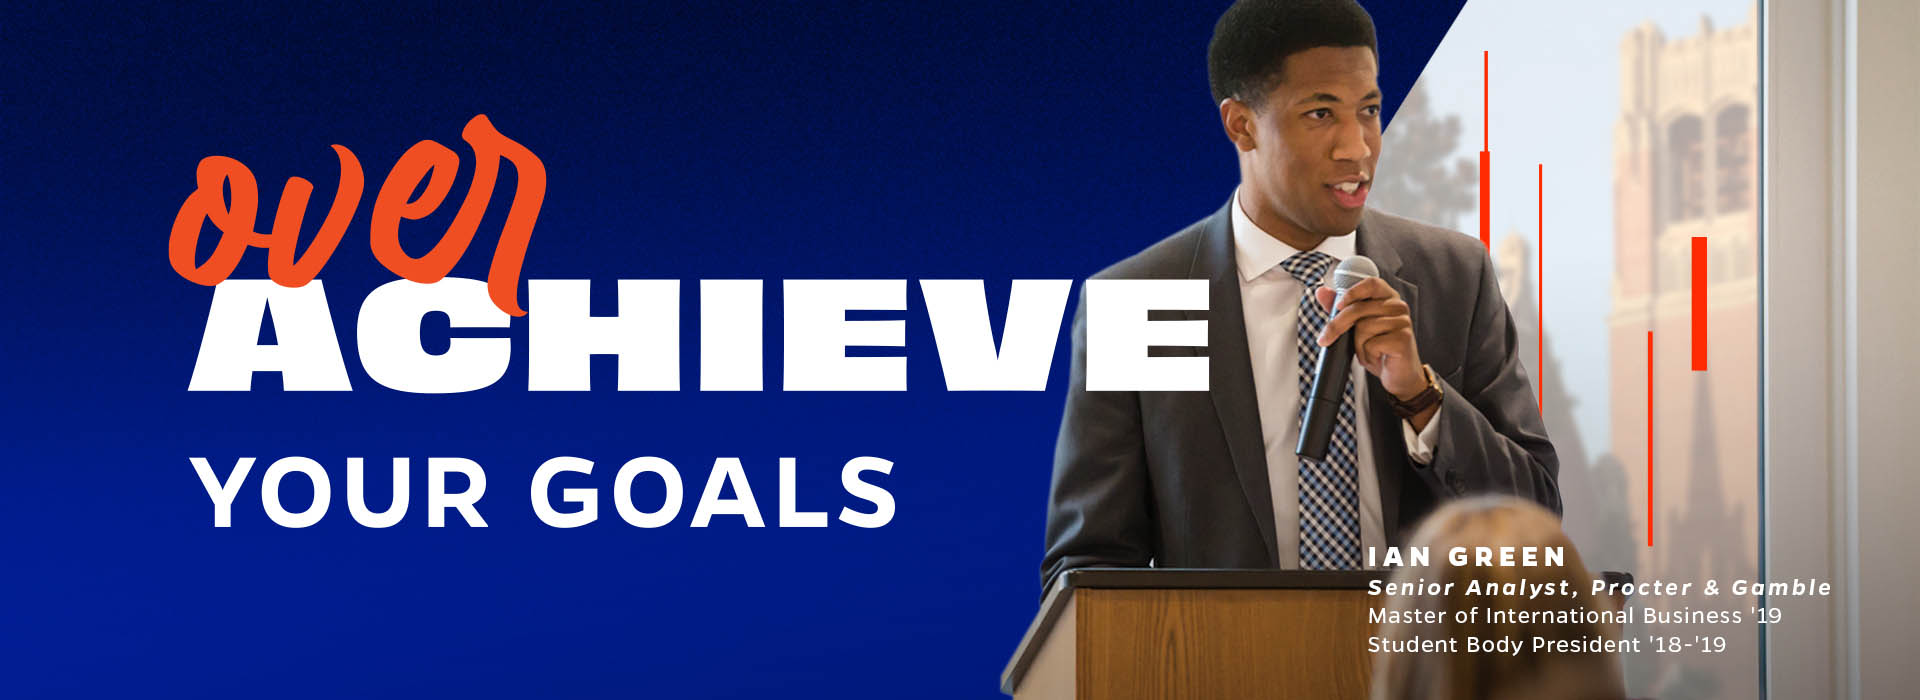 Headline reads: Over achieve your goals. Photo of Ian Green, Senior Analyst, Procter & Gamble, Master of International Business, Student Body President